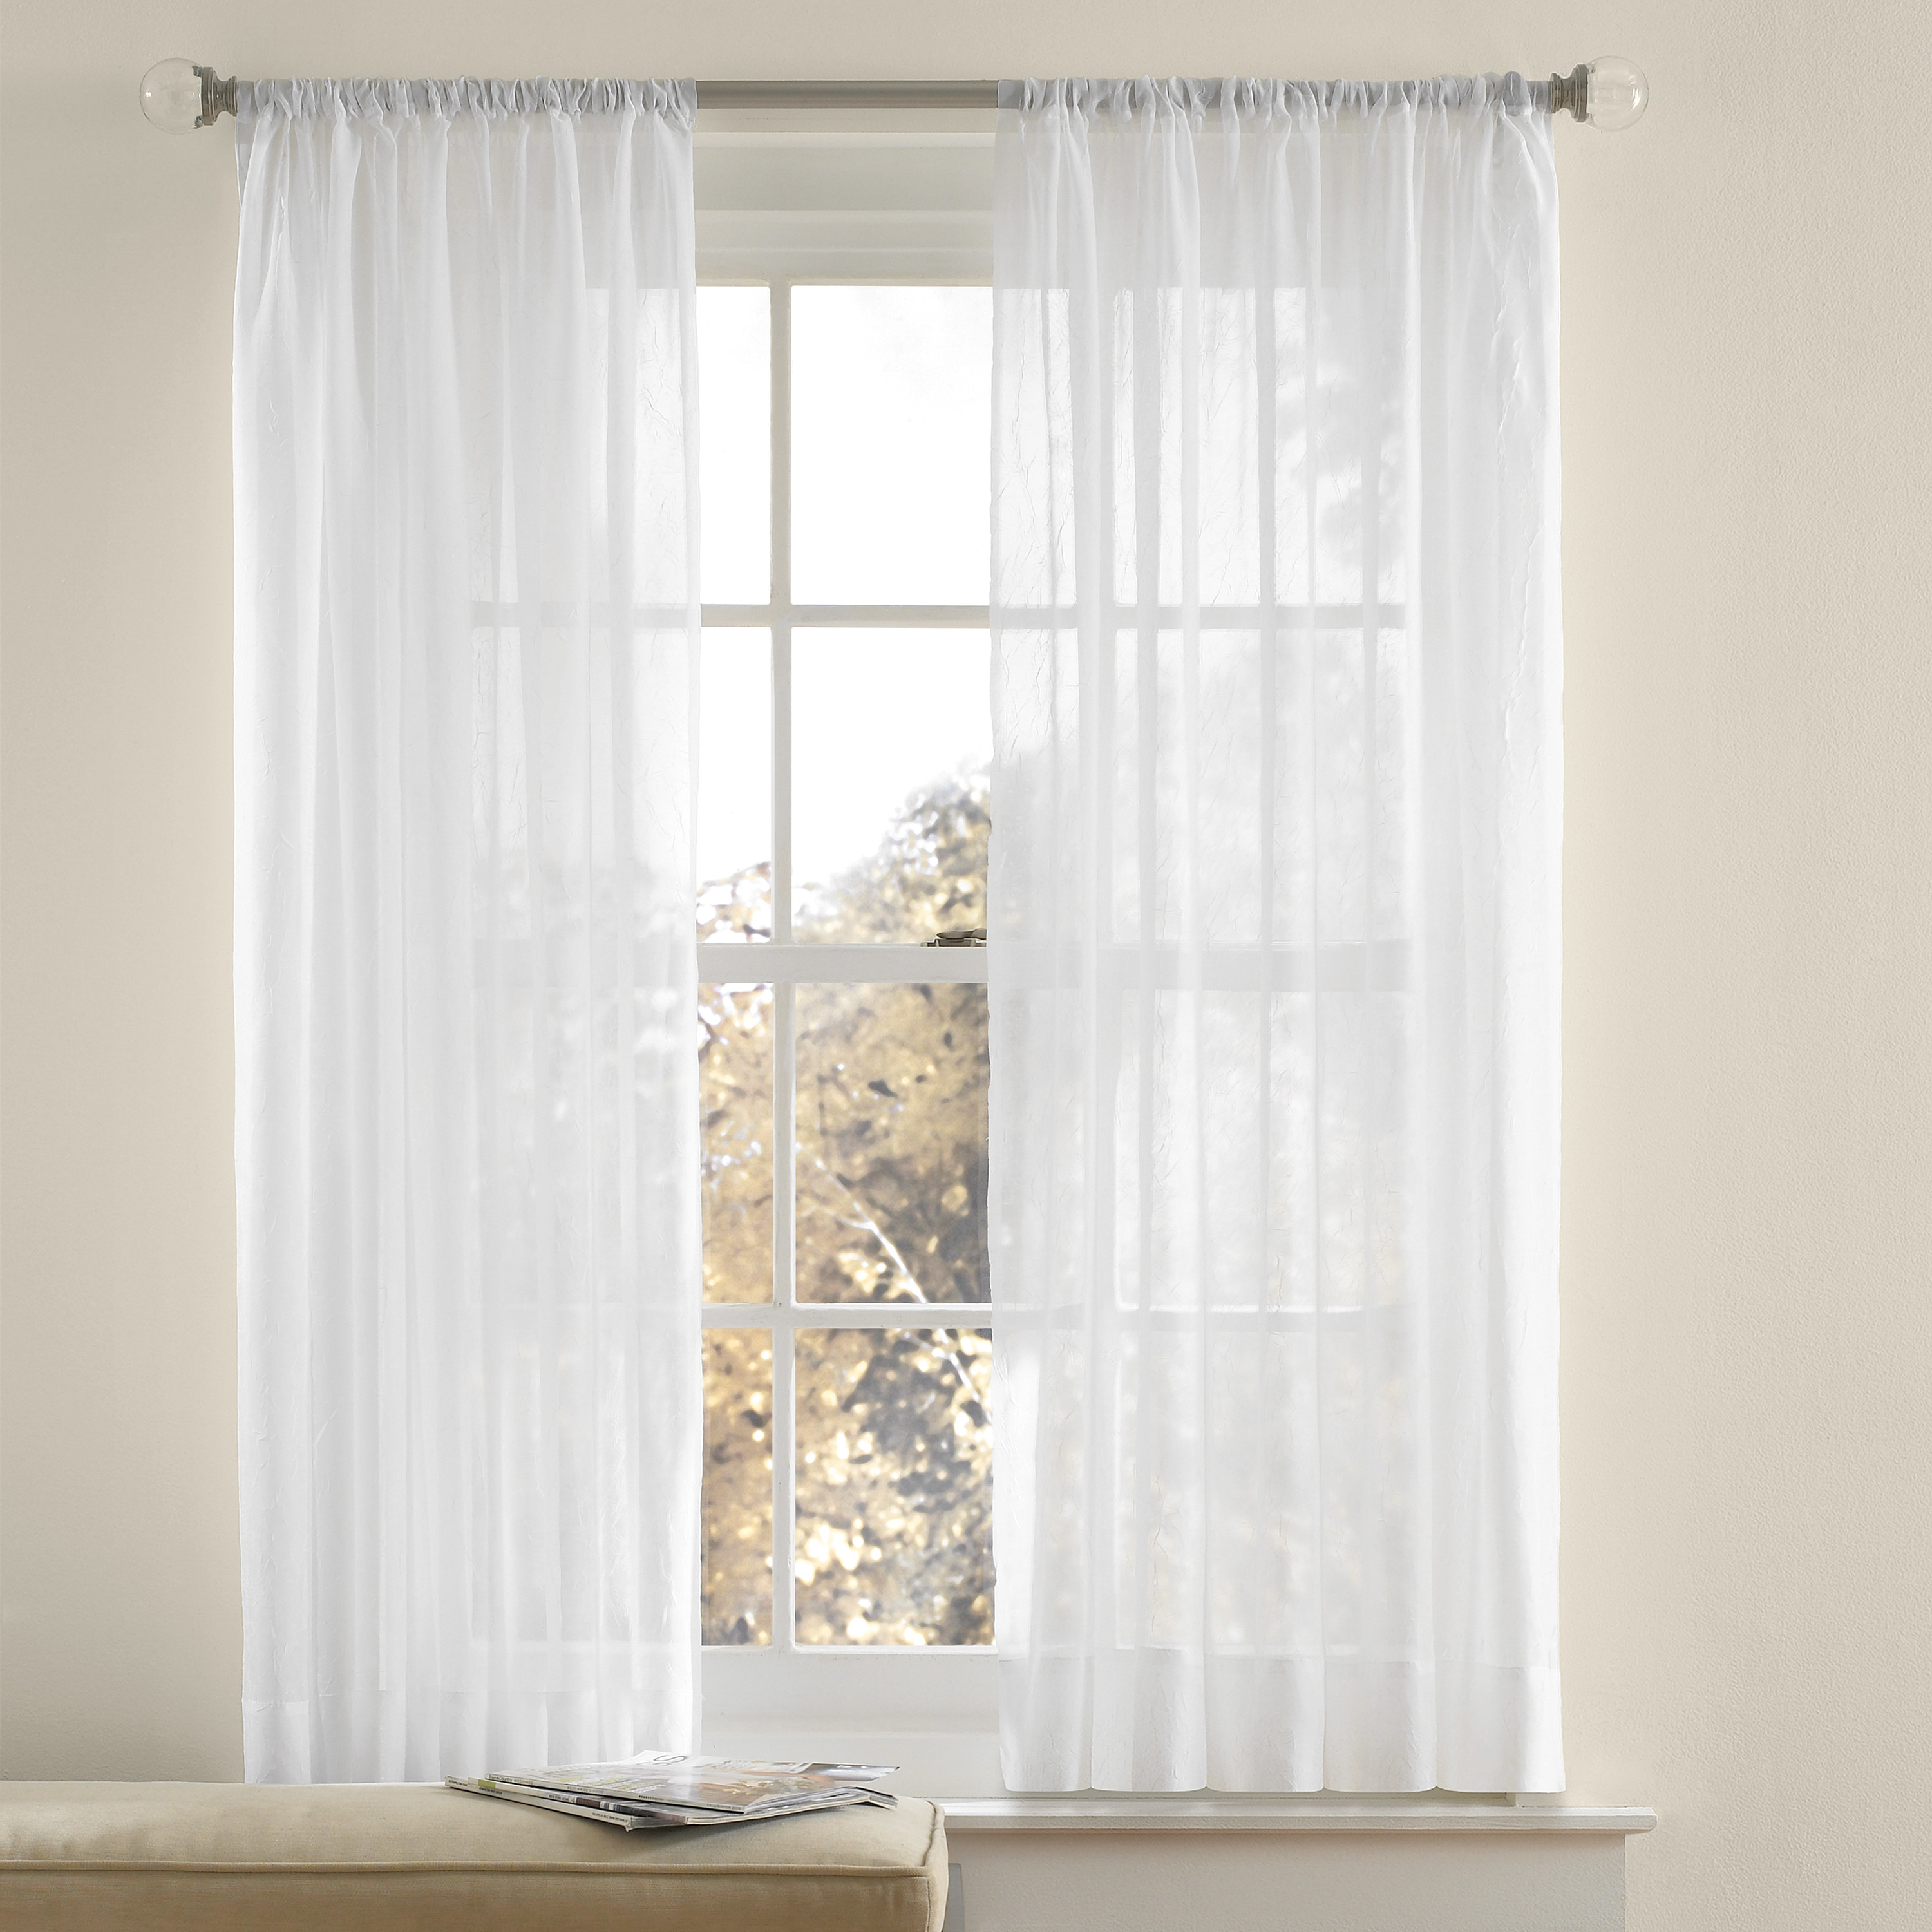 the white curtains hanging over a window